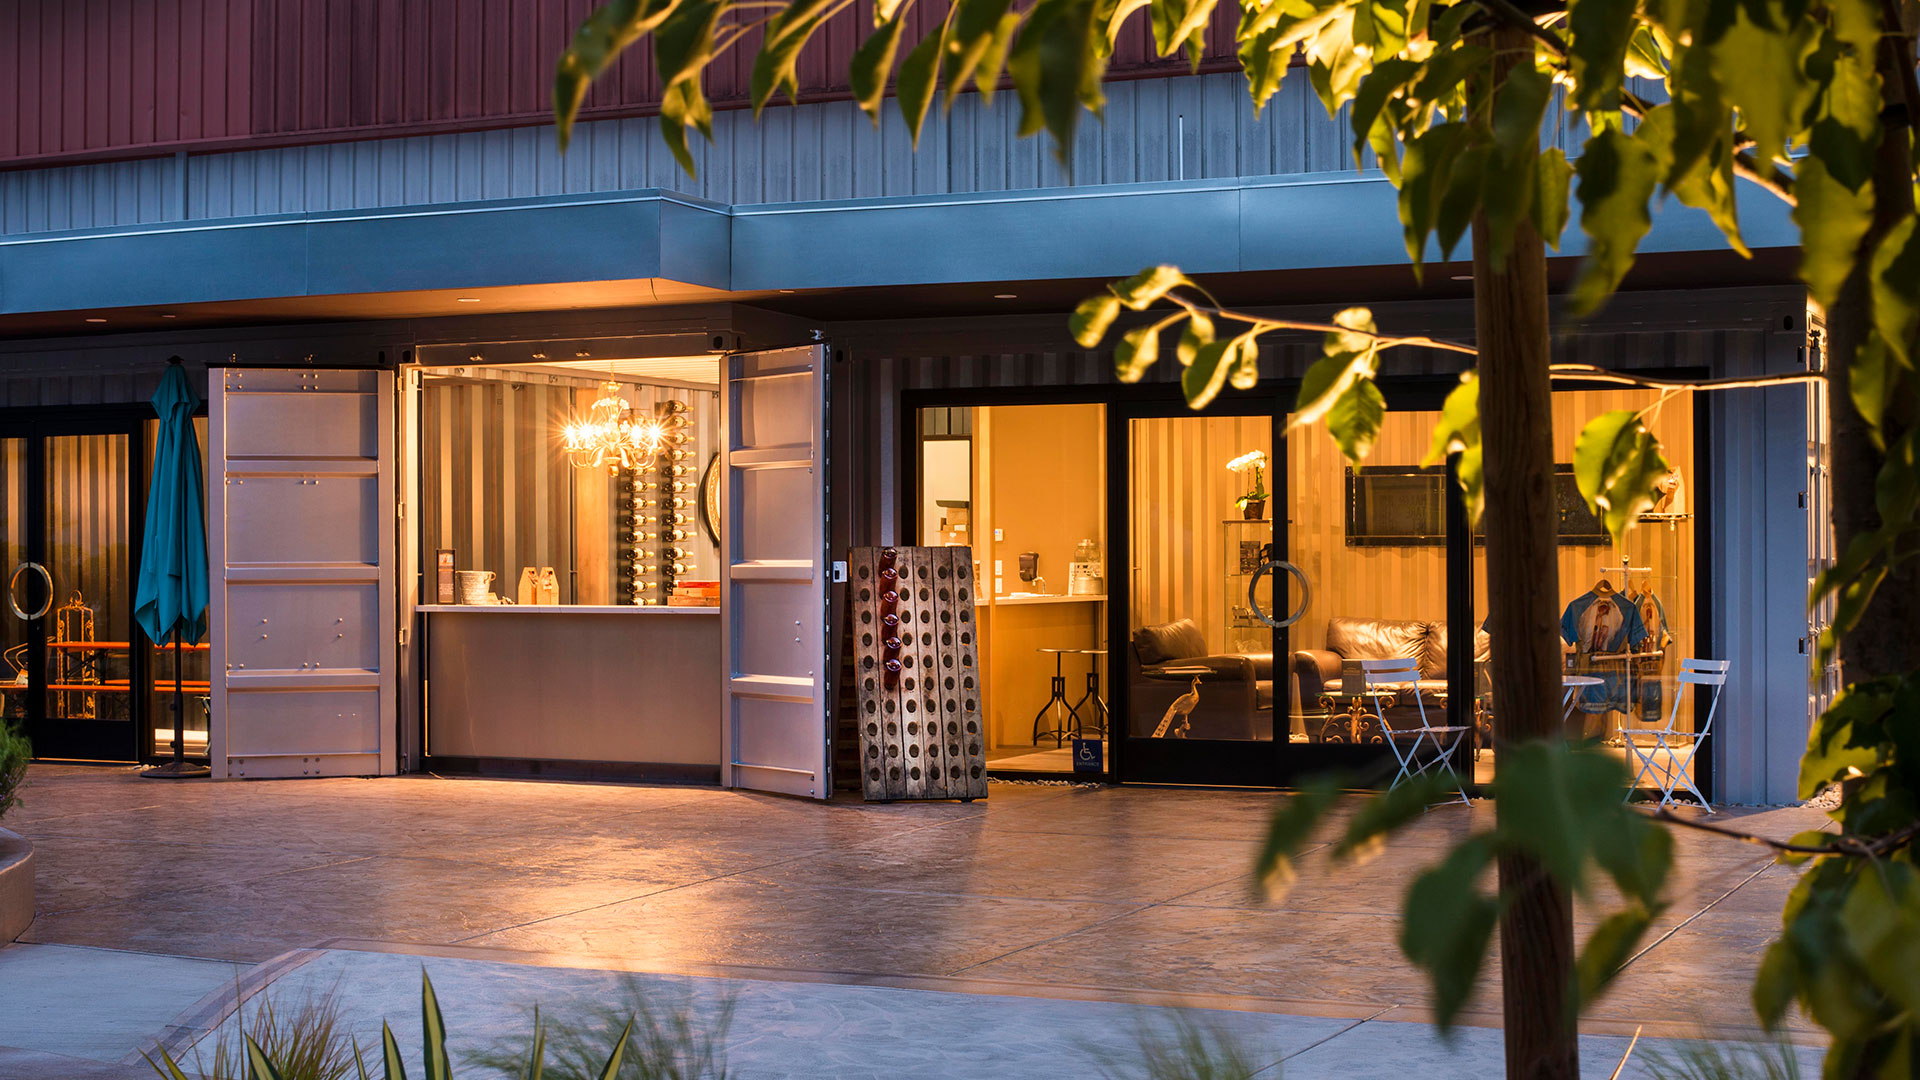 Exterior of tasting room at night, light illuminating through windows and shipping container doors open to serving area.